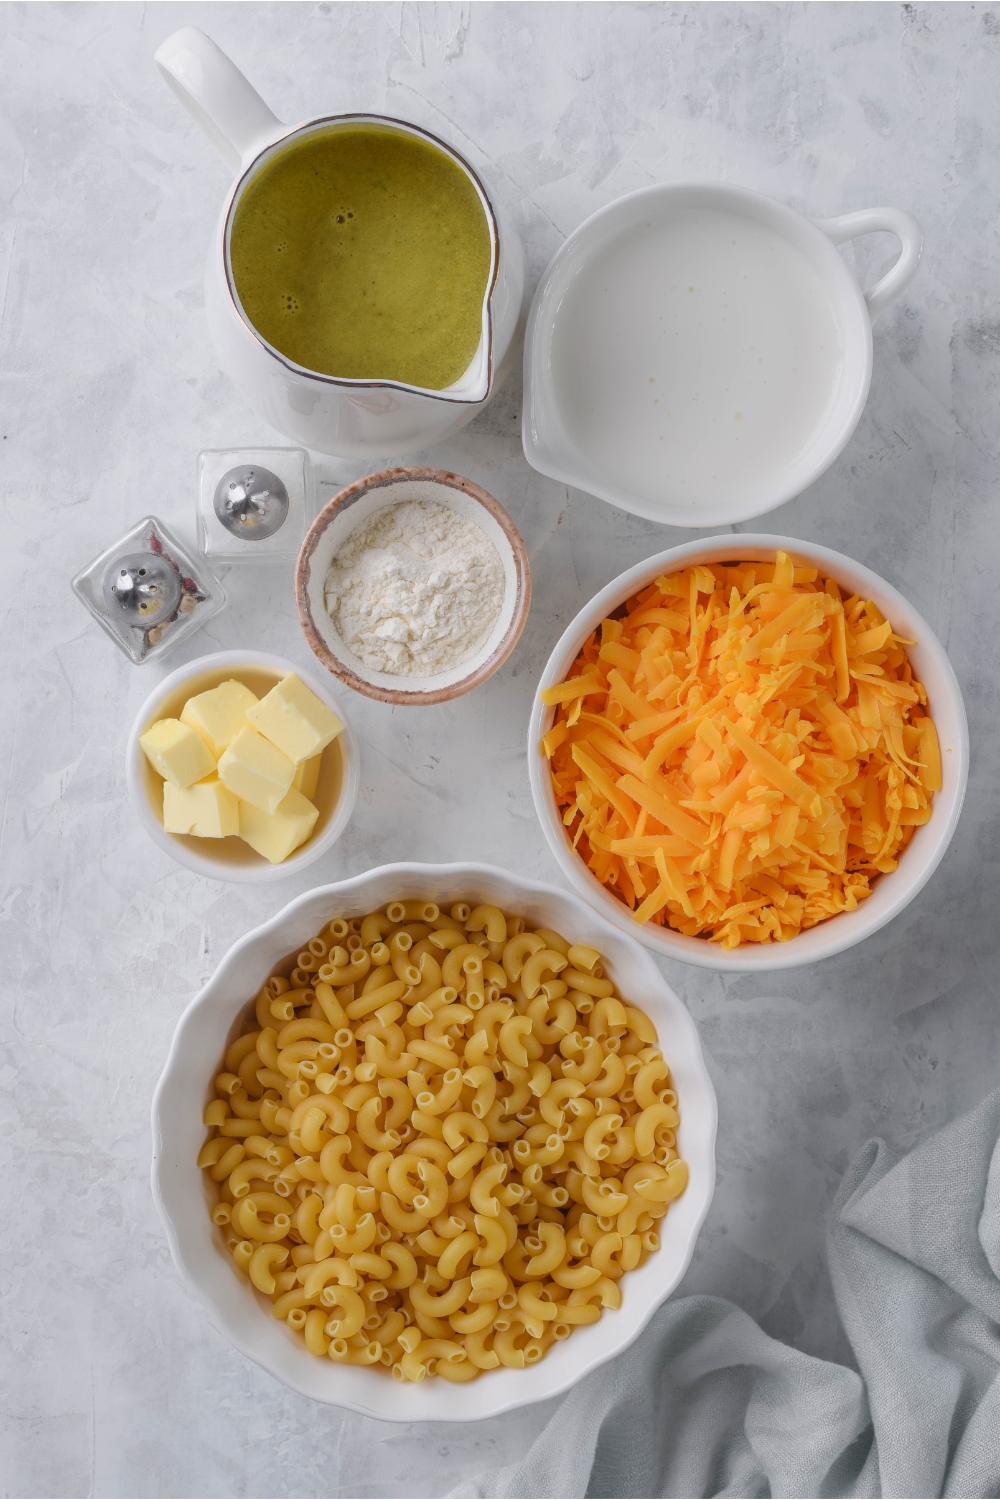 Overhead view of an assortment of ingredients including bowls of dried pasta, shredded cheese, flour, milk, butter cubes, and broth.